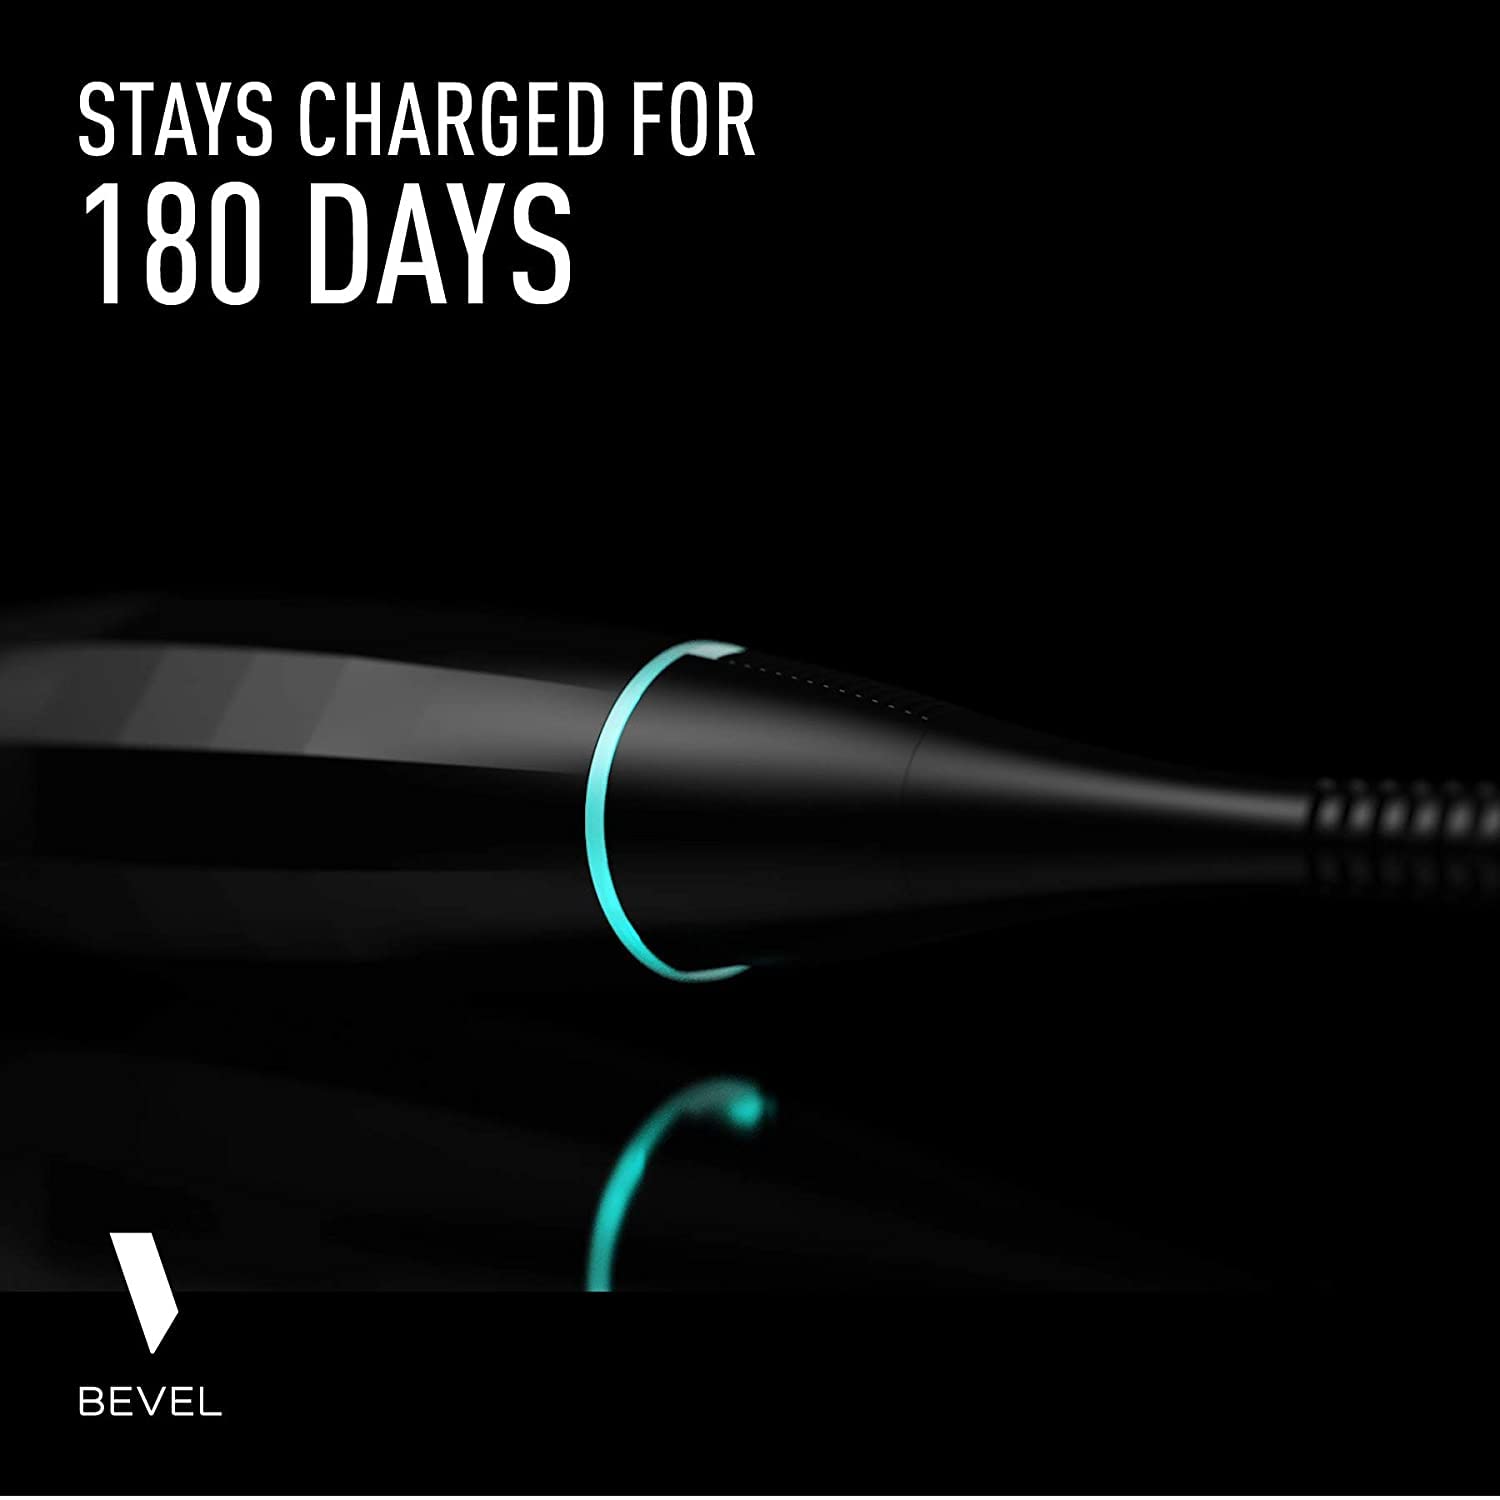 Bevel Beard Trimmer for Men - Black Edition Cordless Trimmer, 8 Hour Rechargeable Battery Life, Tool Free Adjustable Zero Gapped Blade, Barber Supplies, Mustache Trimmer : Beauty & Personal Care